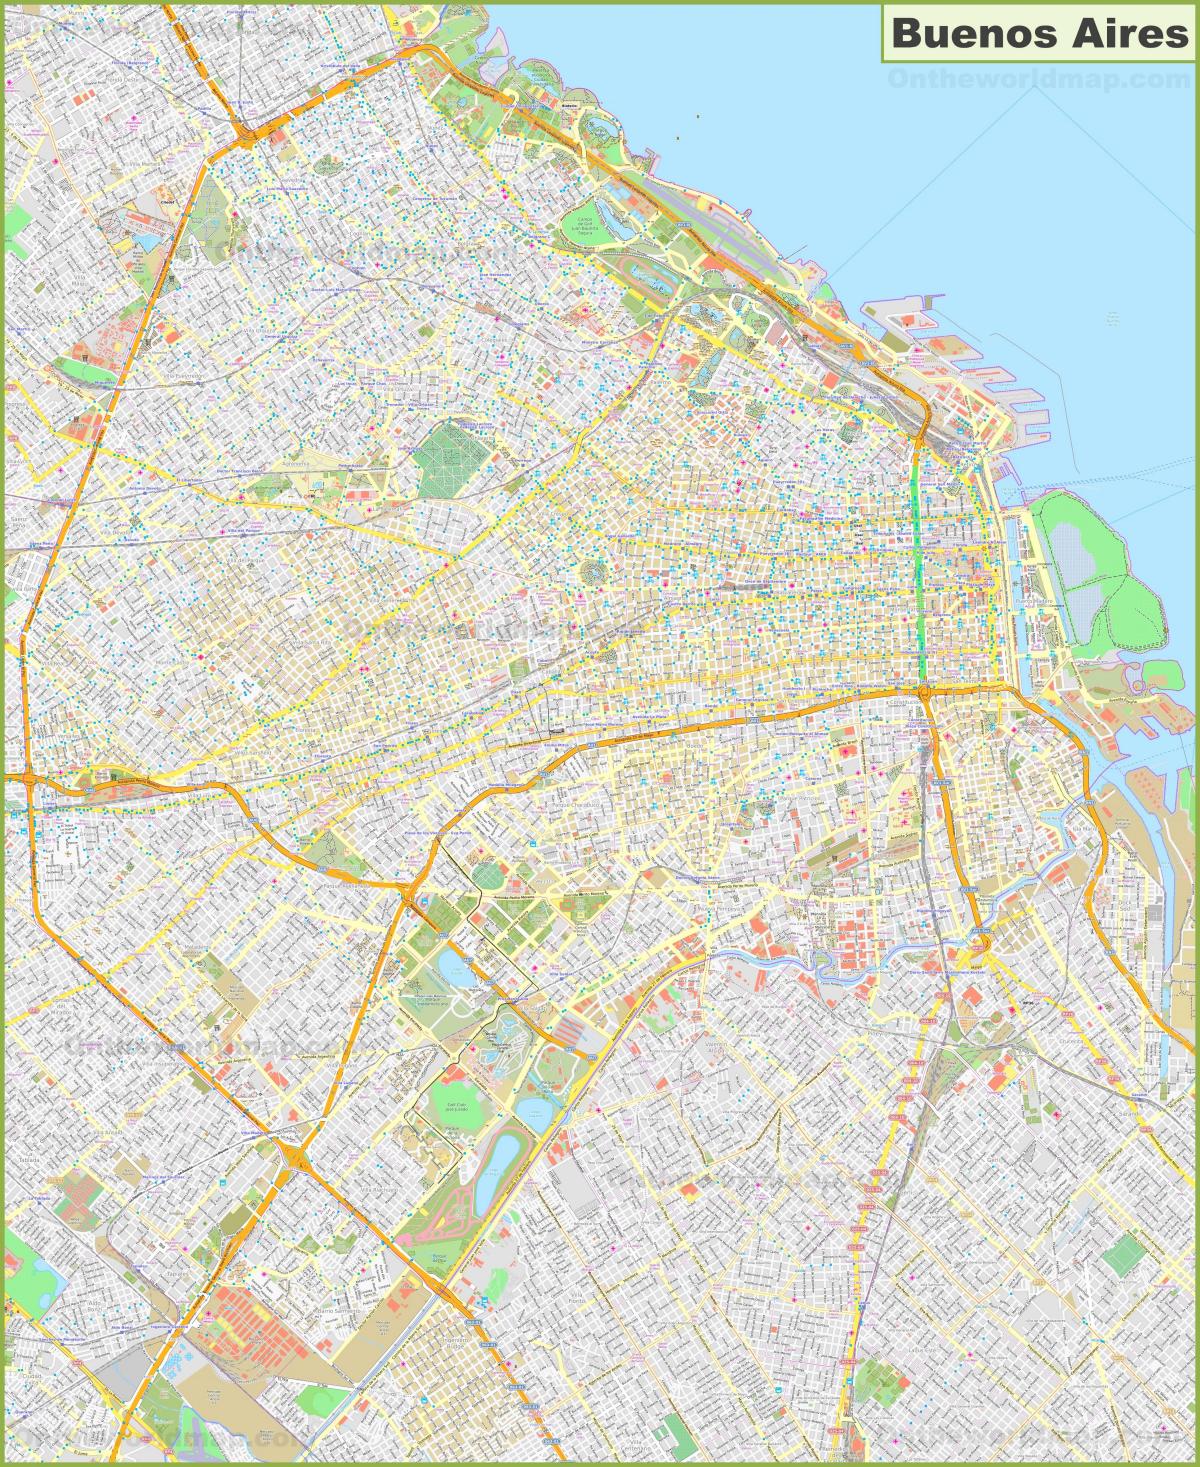 Buenos Aires streets map